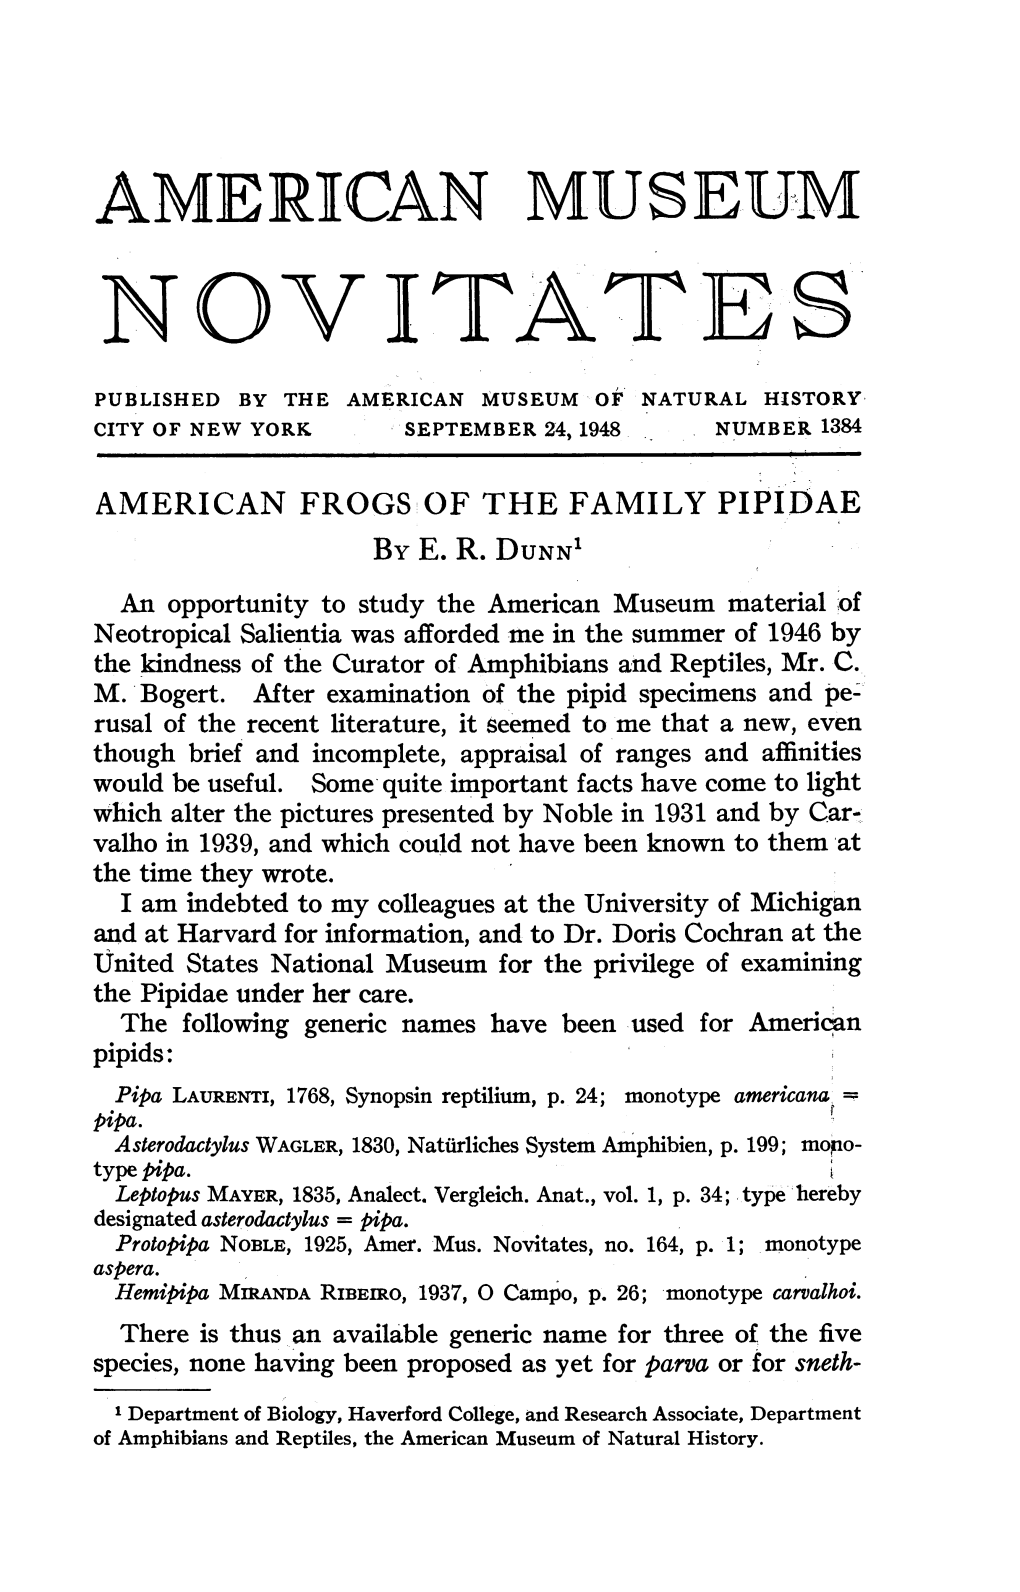 Novitate4s Published by the American Museum of Natural History City of New York September 24, 1948 Number 1384